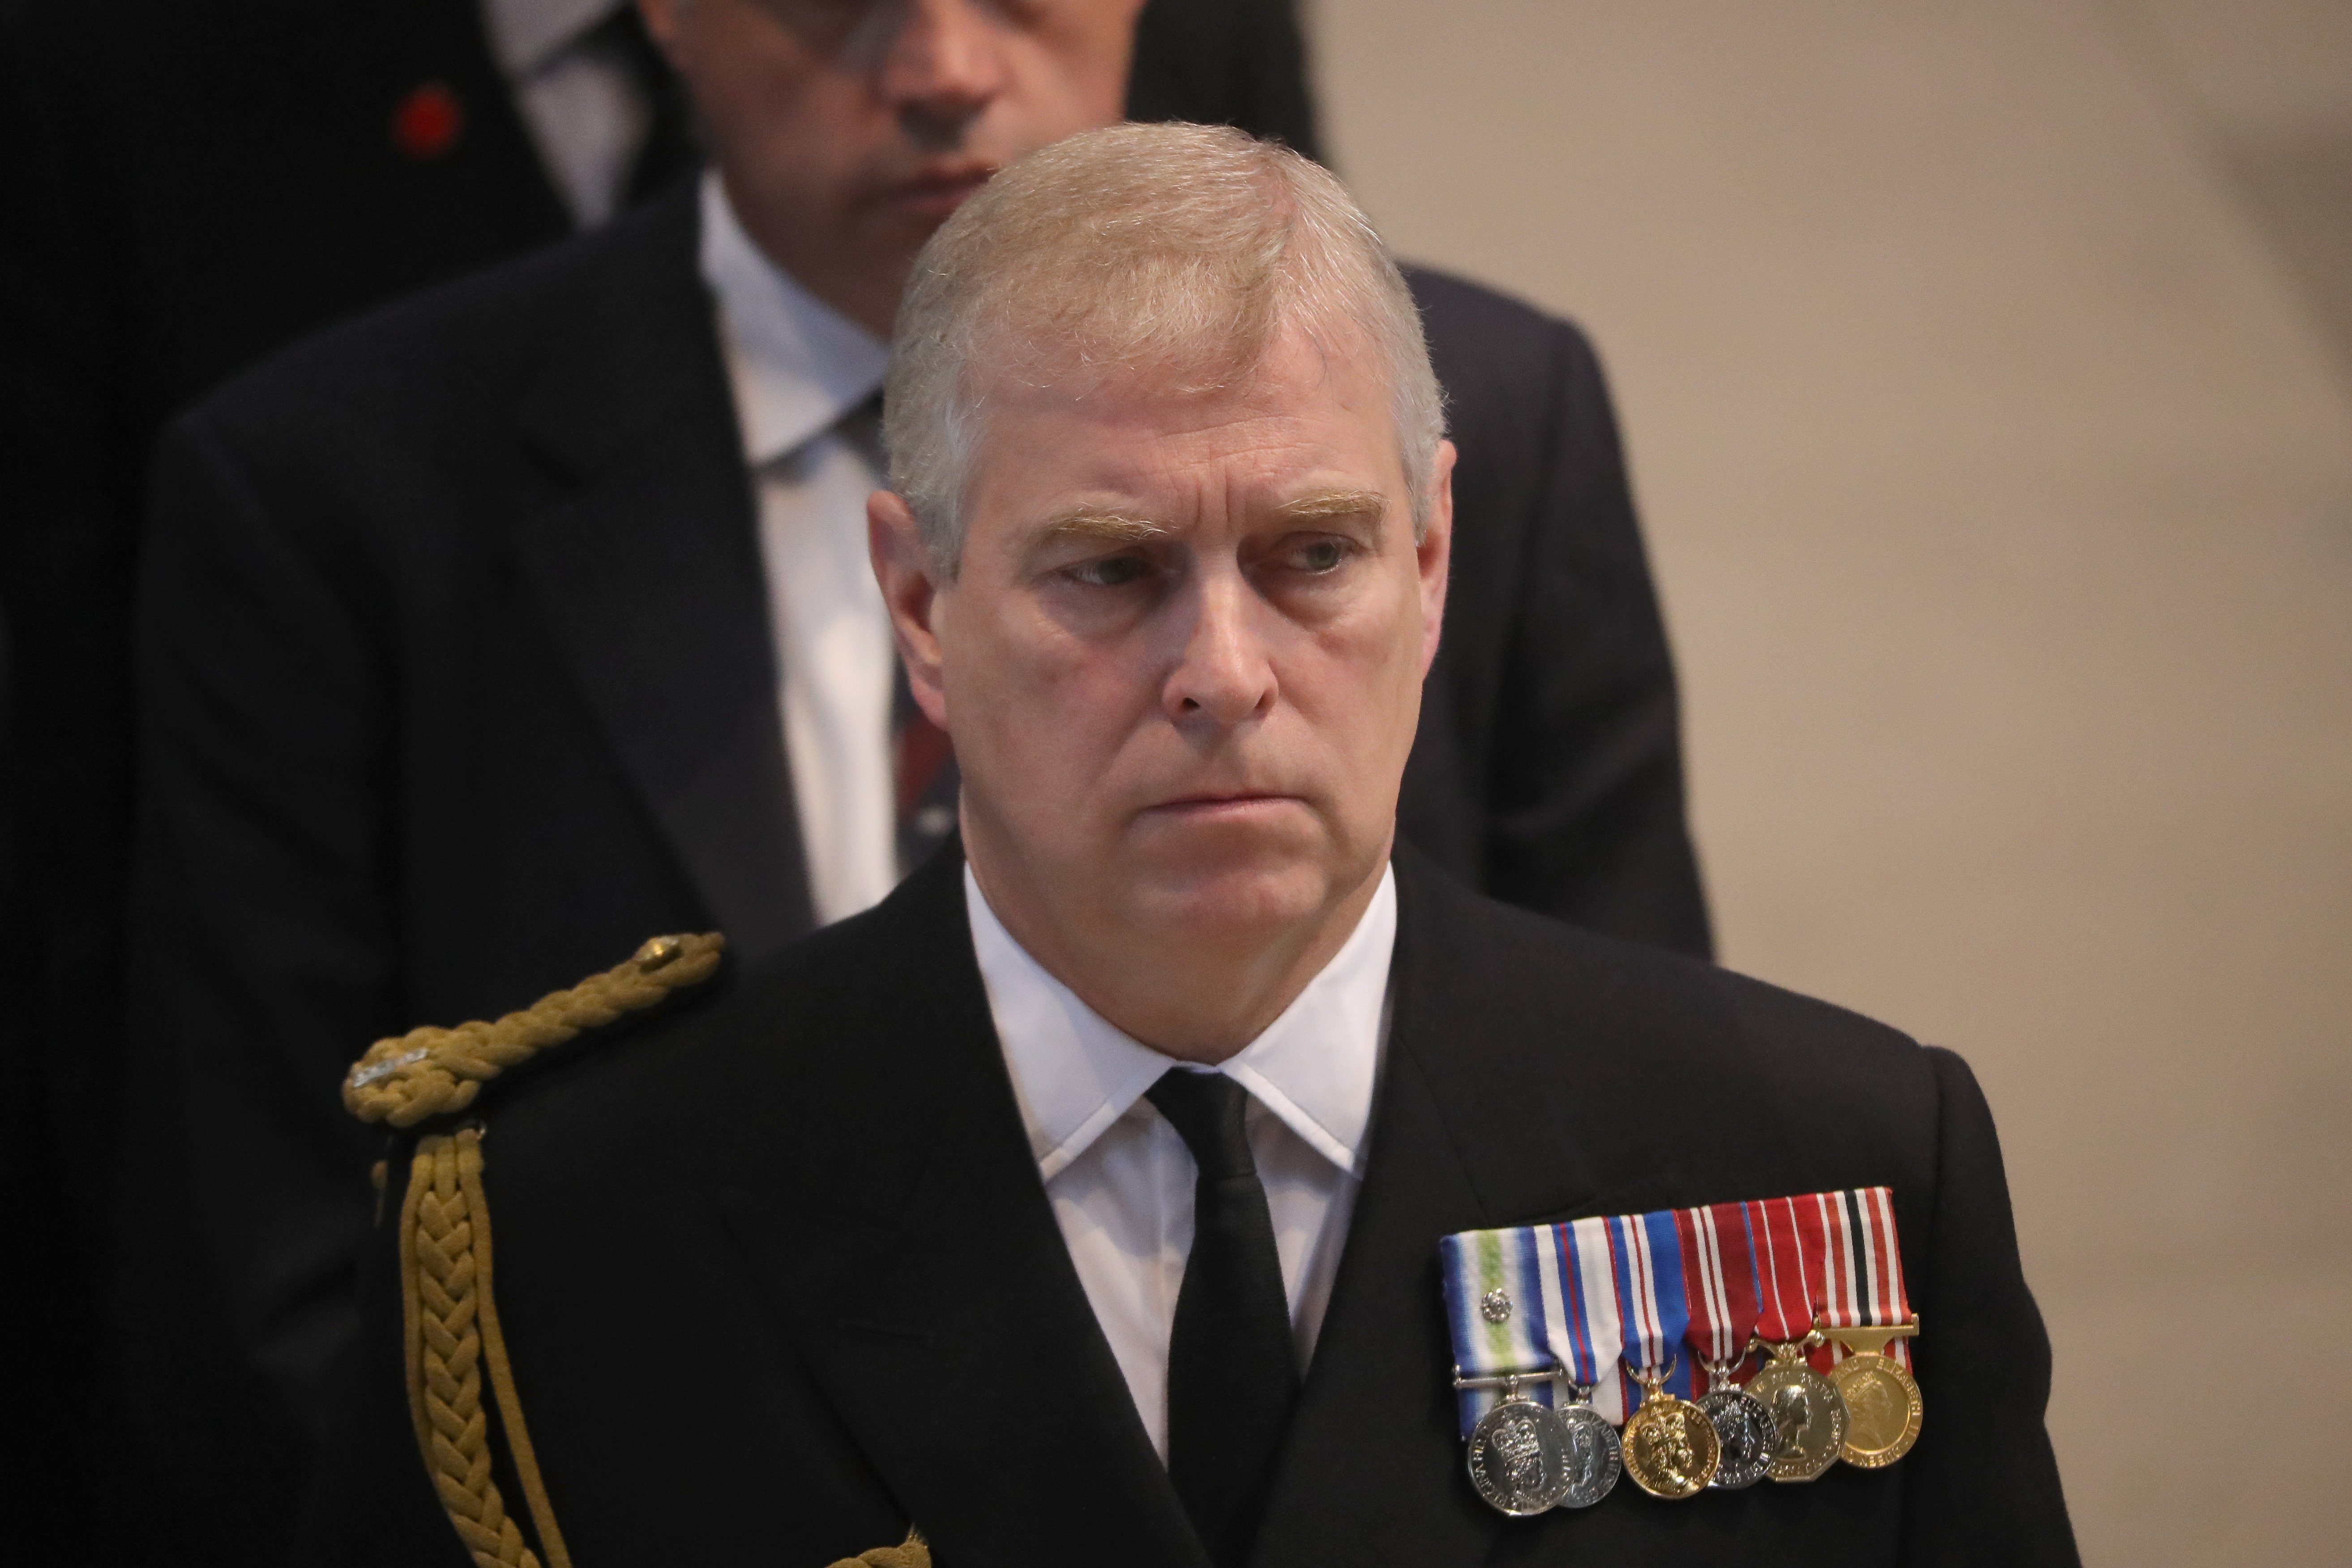  Prince Andrew, Duke of York, attends a commemoration service at Manchester Cathedral marking the 100th anniversary since the start of the Battle of the Somme. July 1, 2016 in Manchester, England. | Source: Getty Images